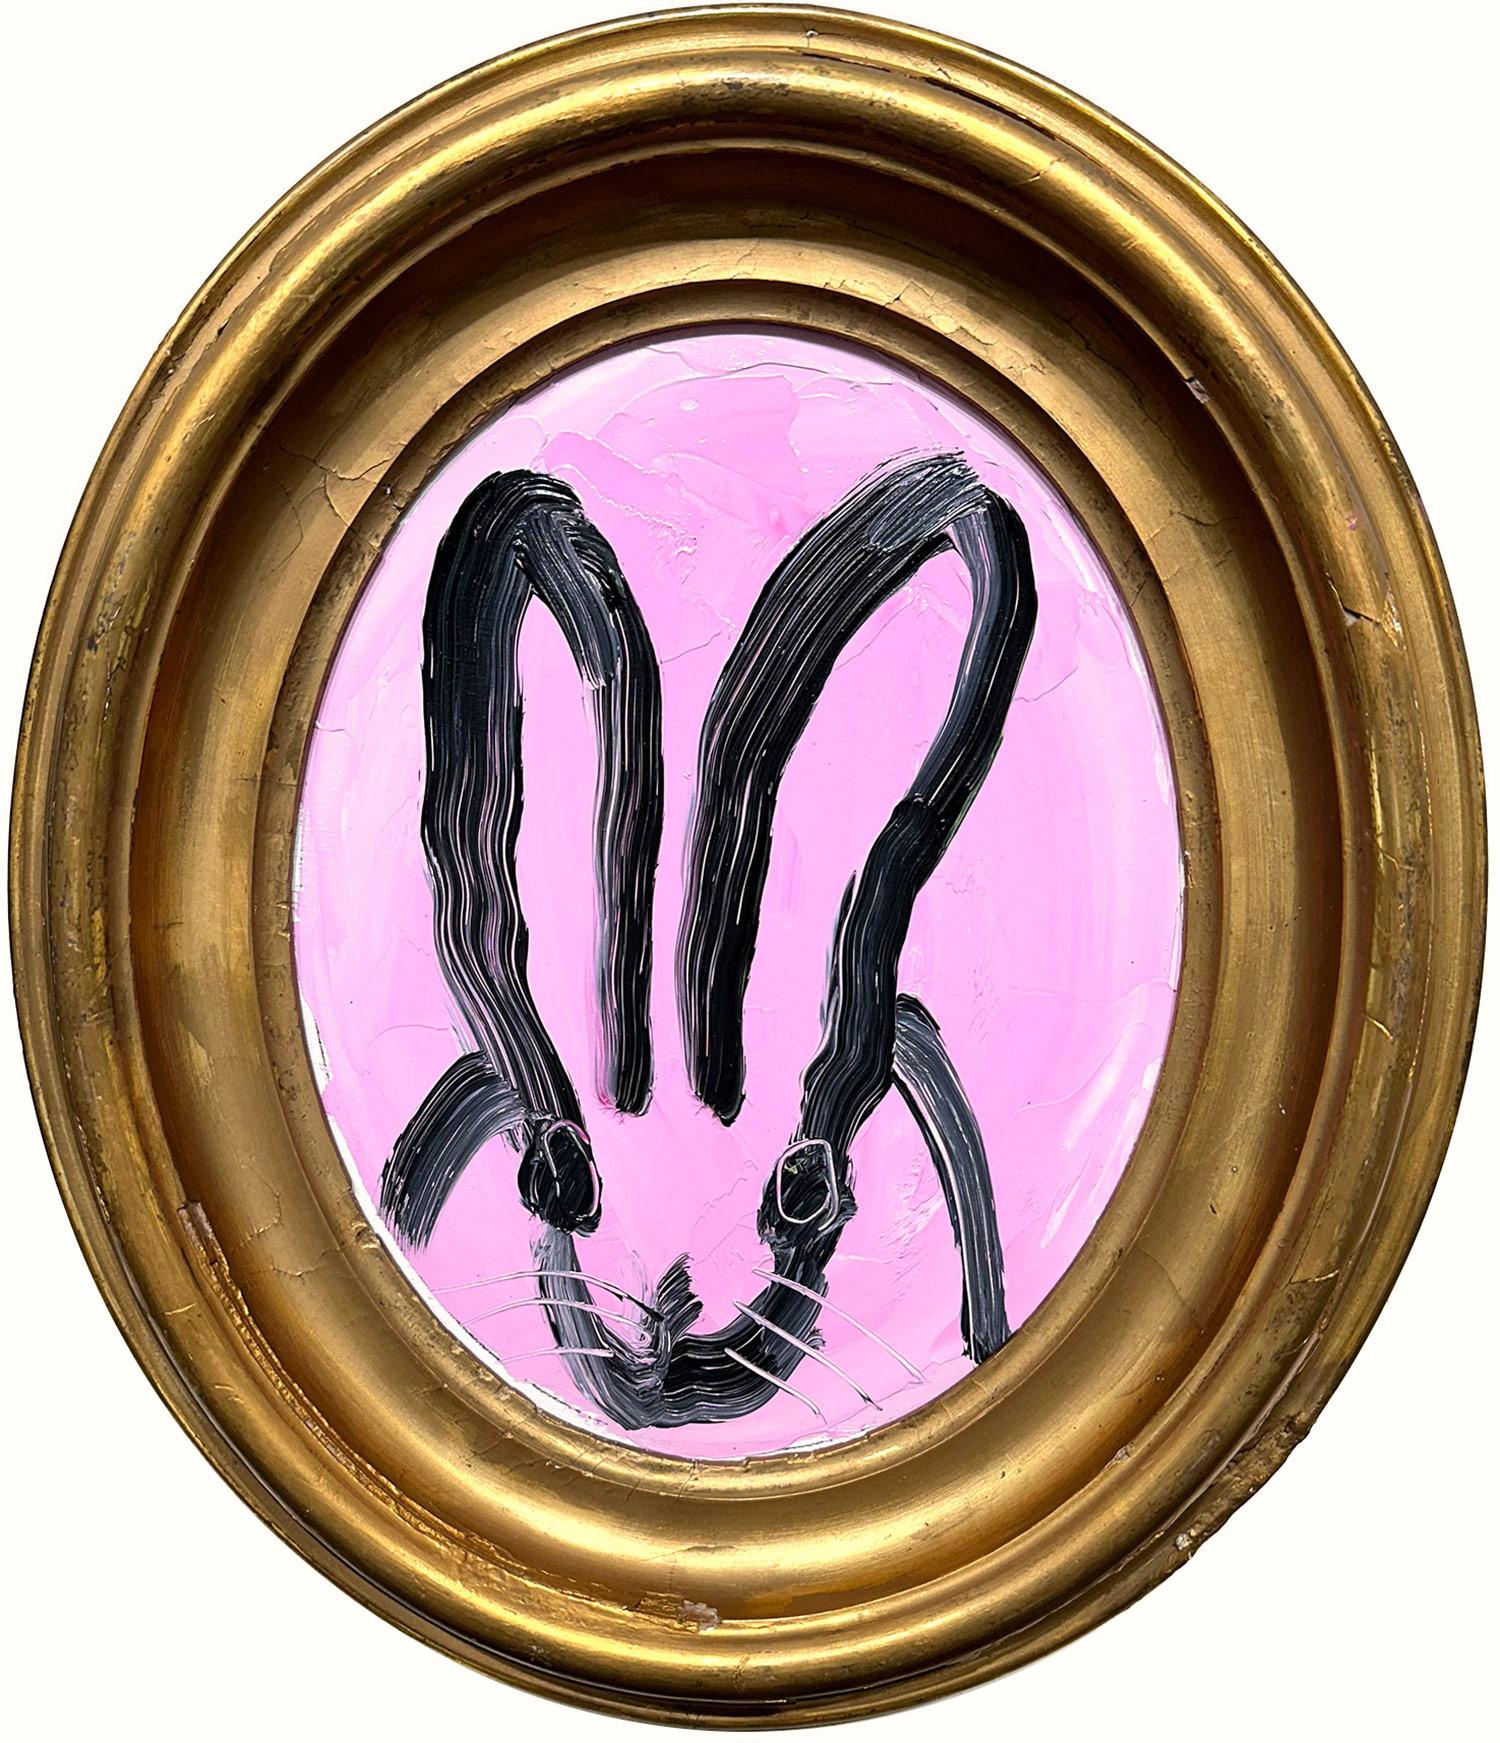 Hunt Slonem Abstract Painting - "Maybe" Black Bunny on Light Lavender Background Oil Painting - Oval Frame